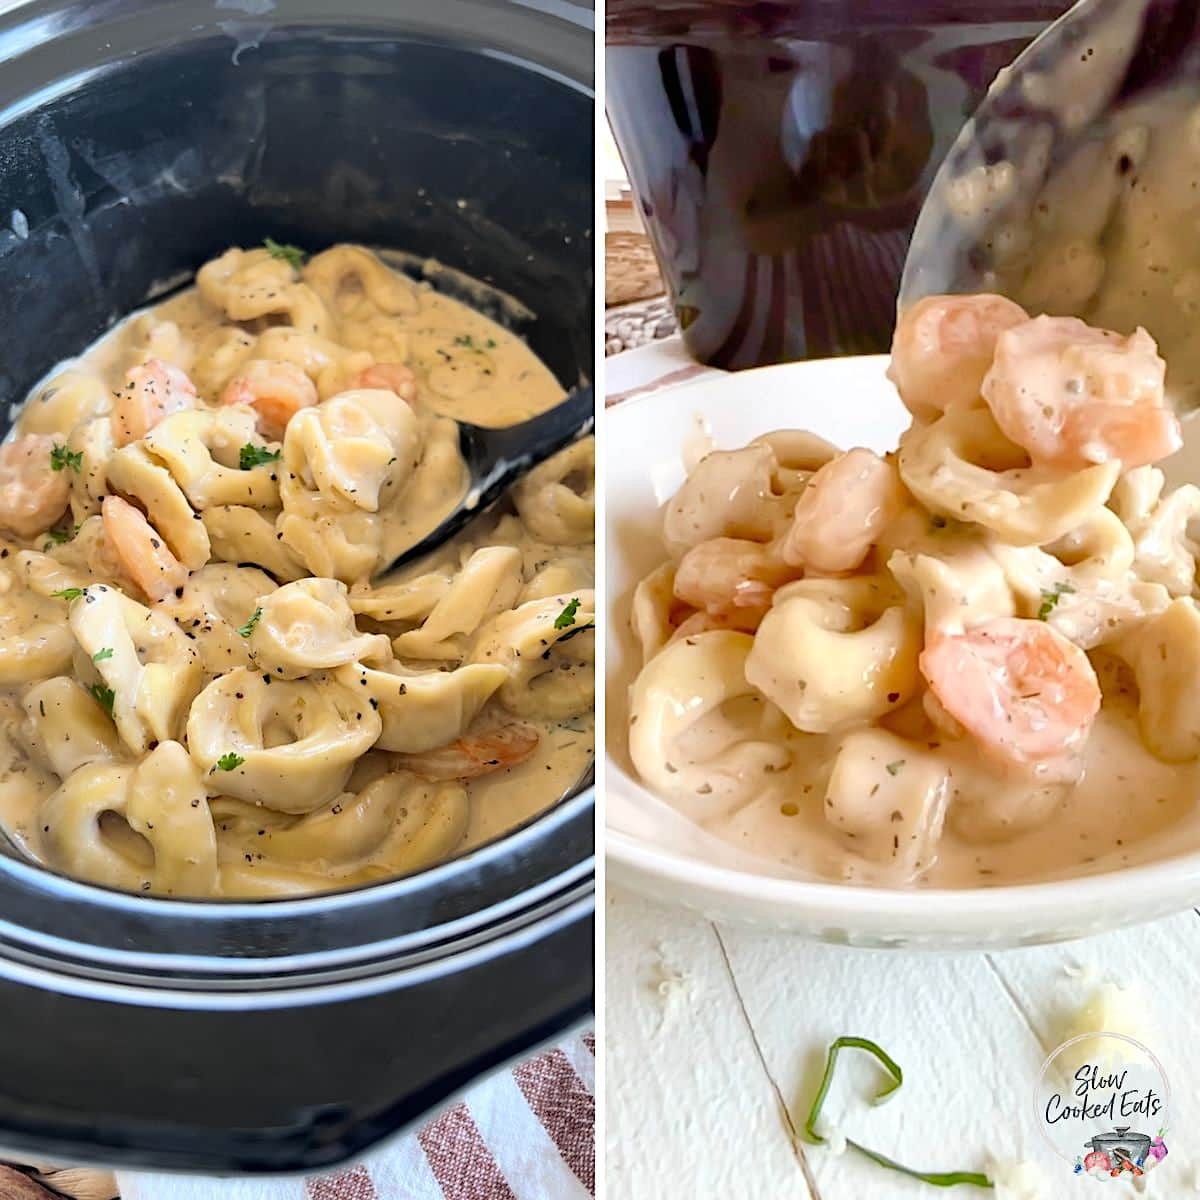 Serving the shrimp Alfredo tortellini out of the slow cooker.